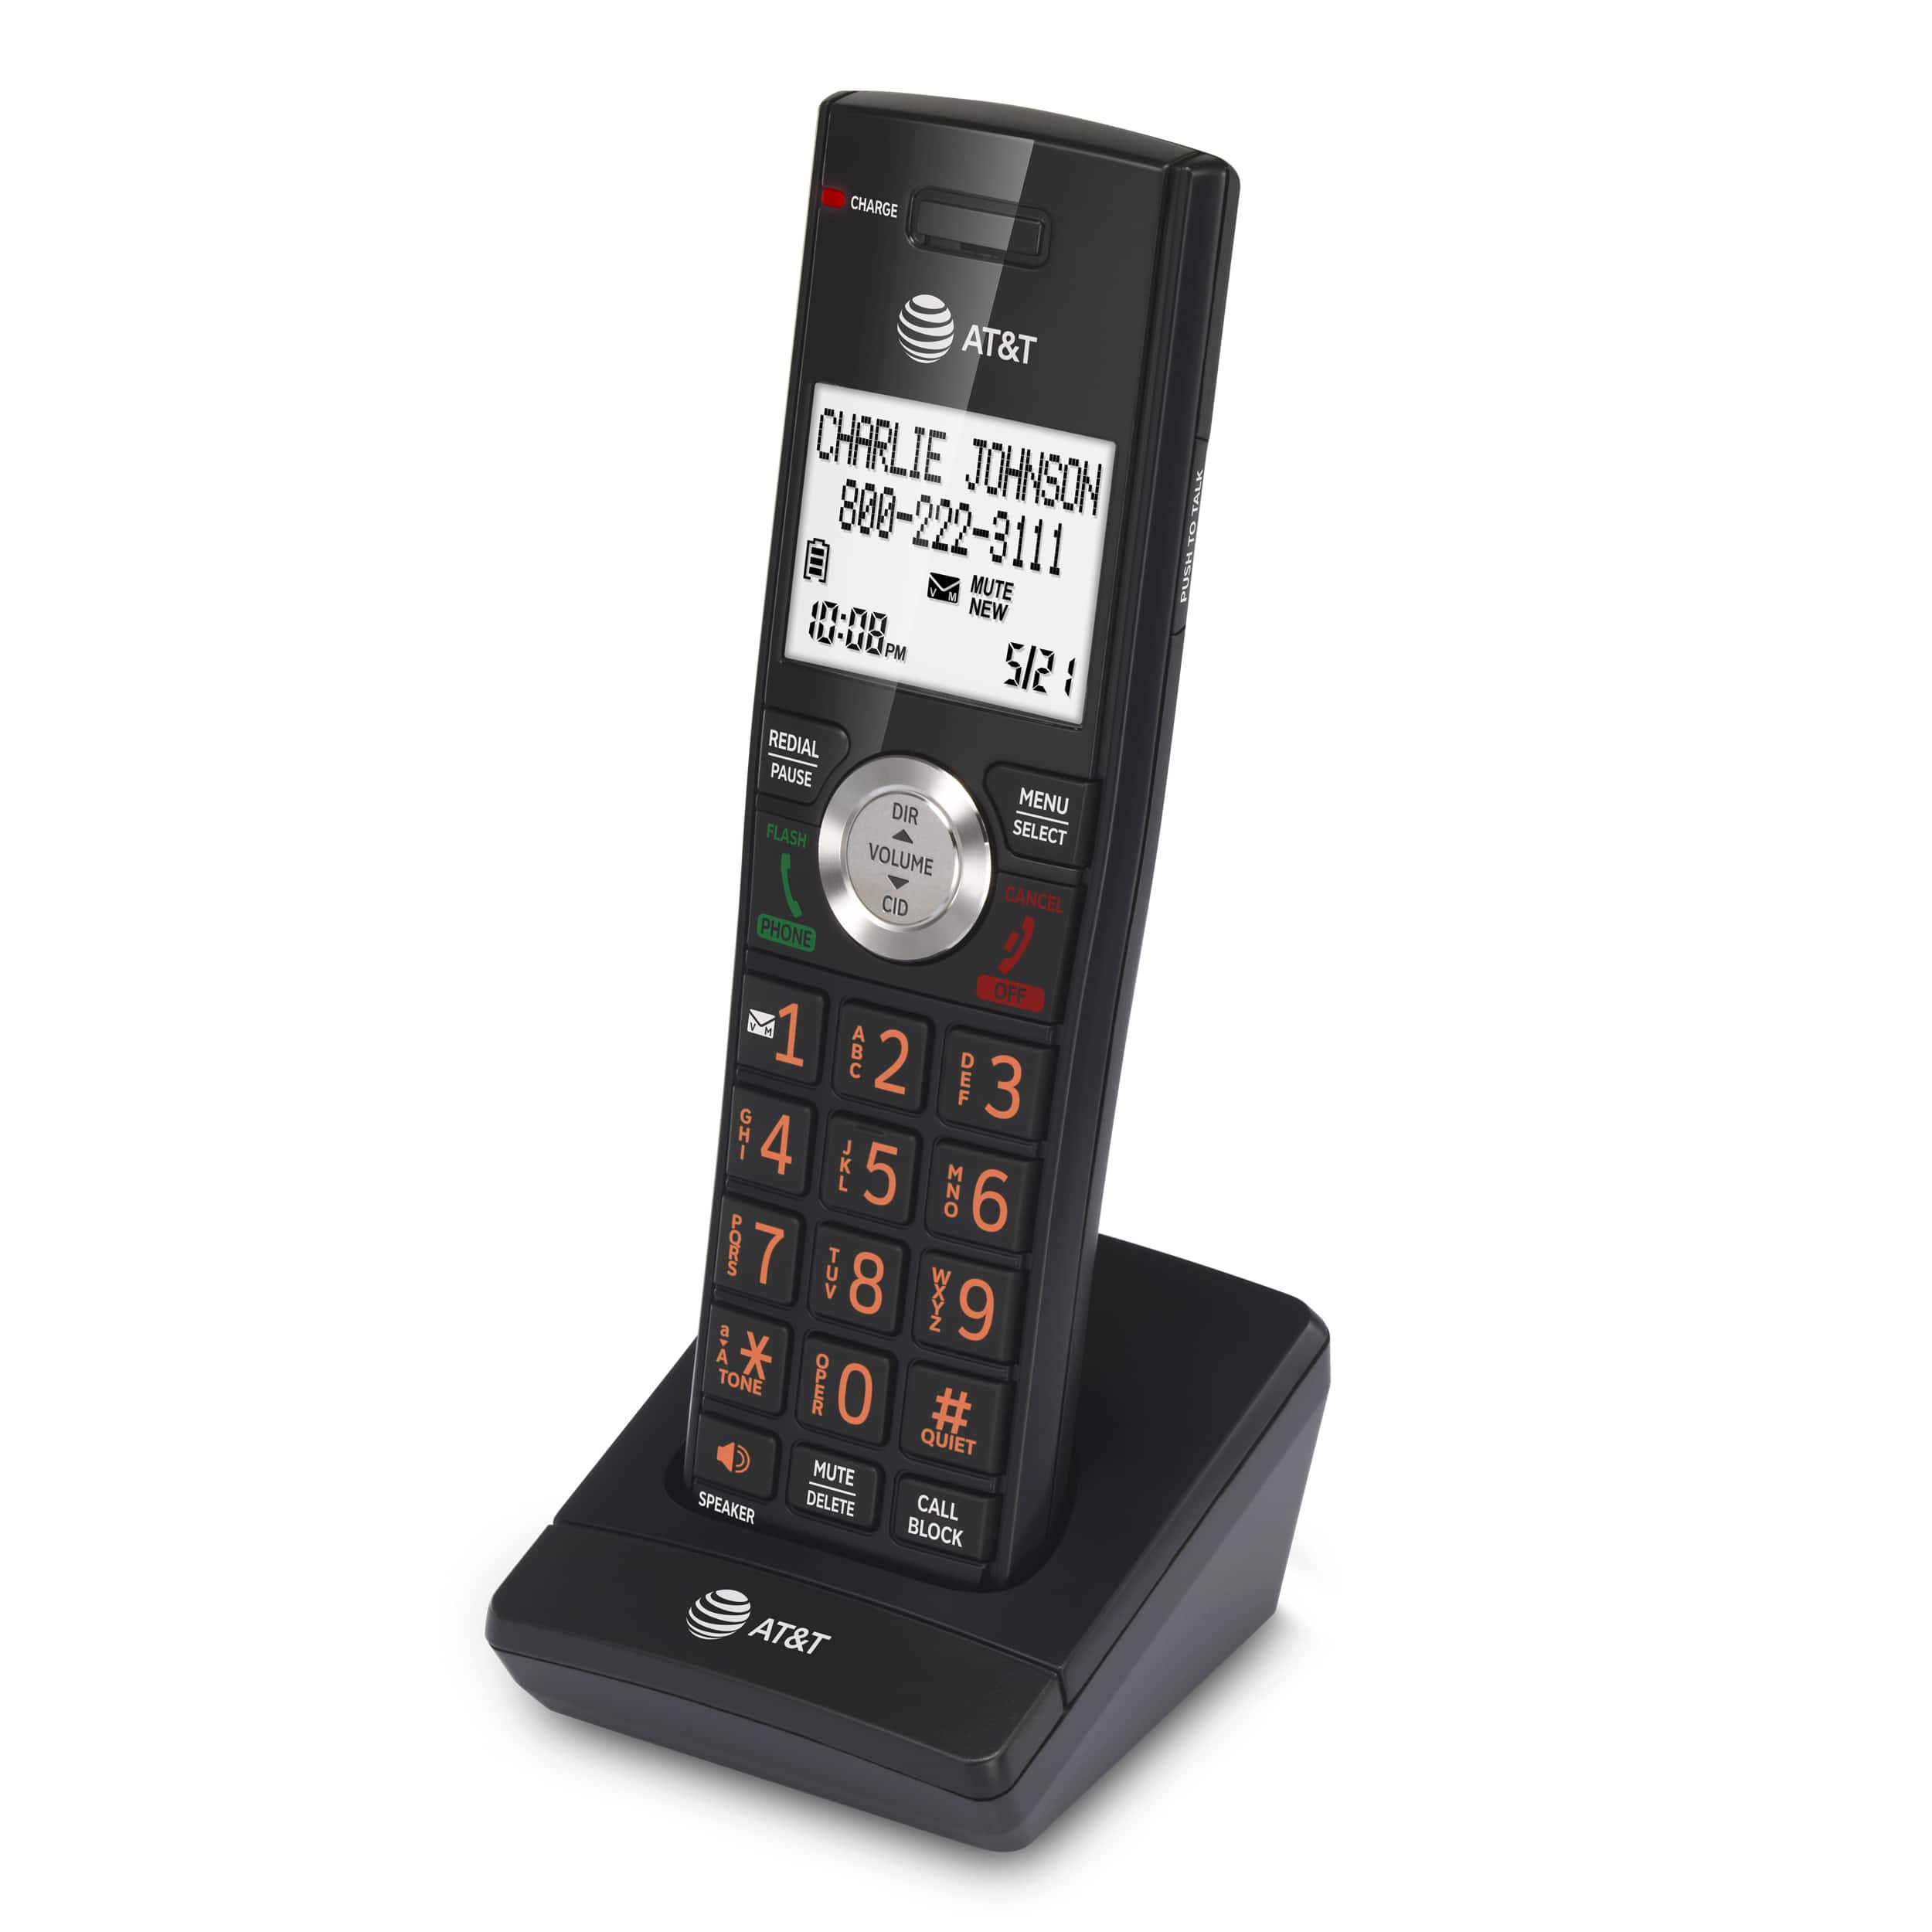 6 handset phone system with smart call blocker - view 19